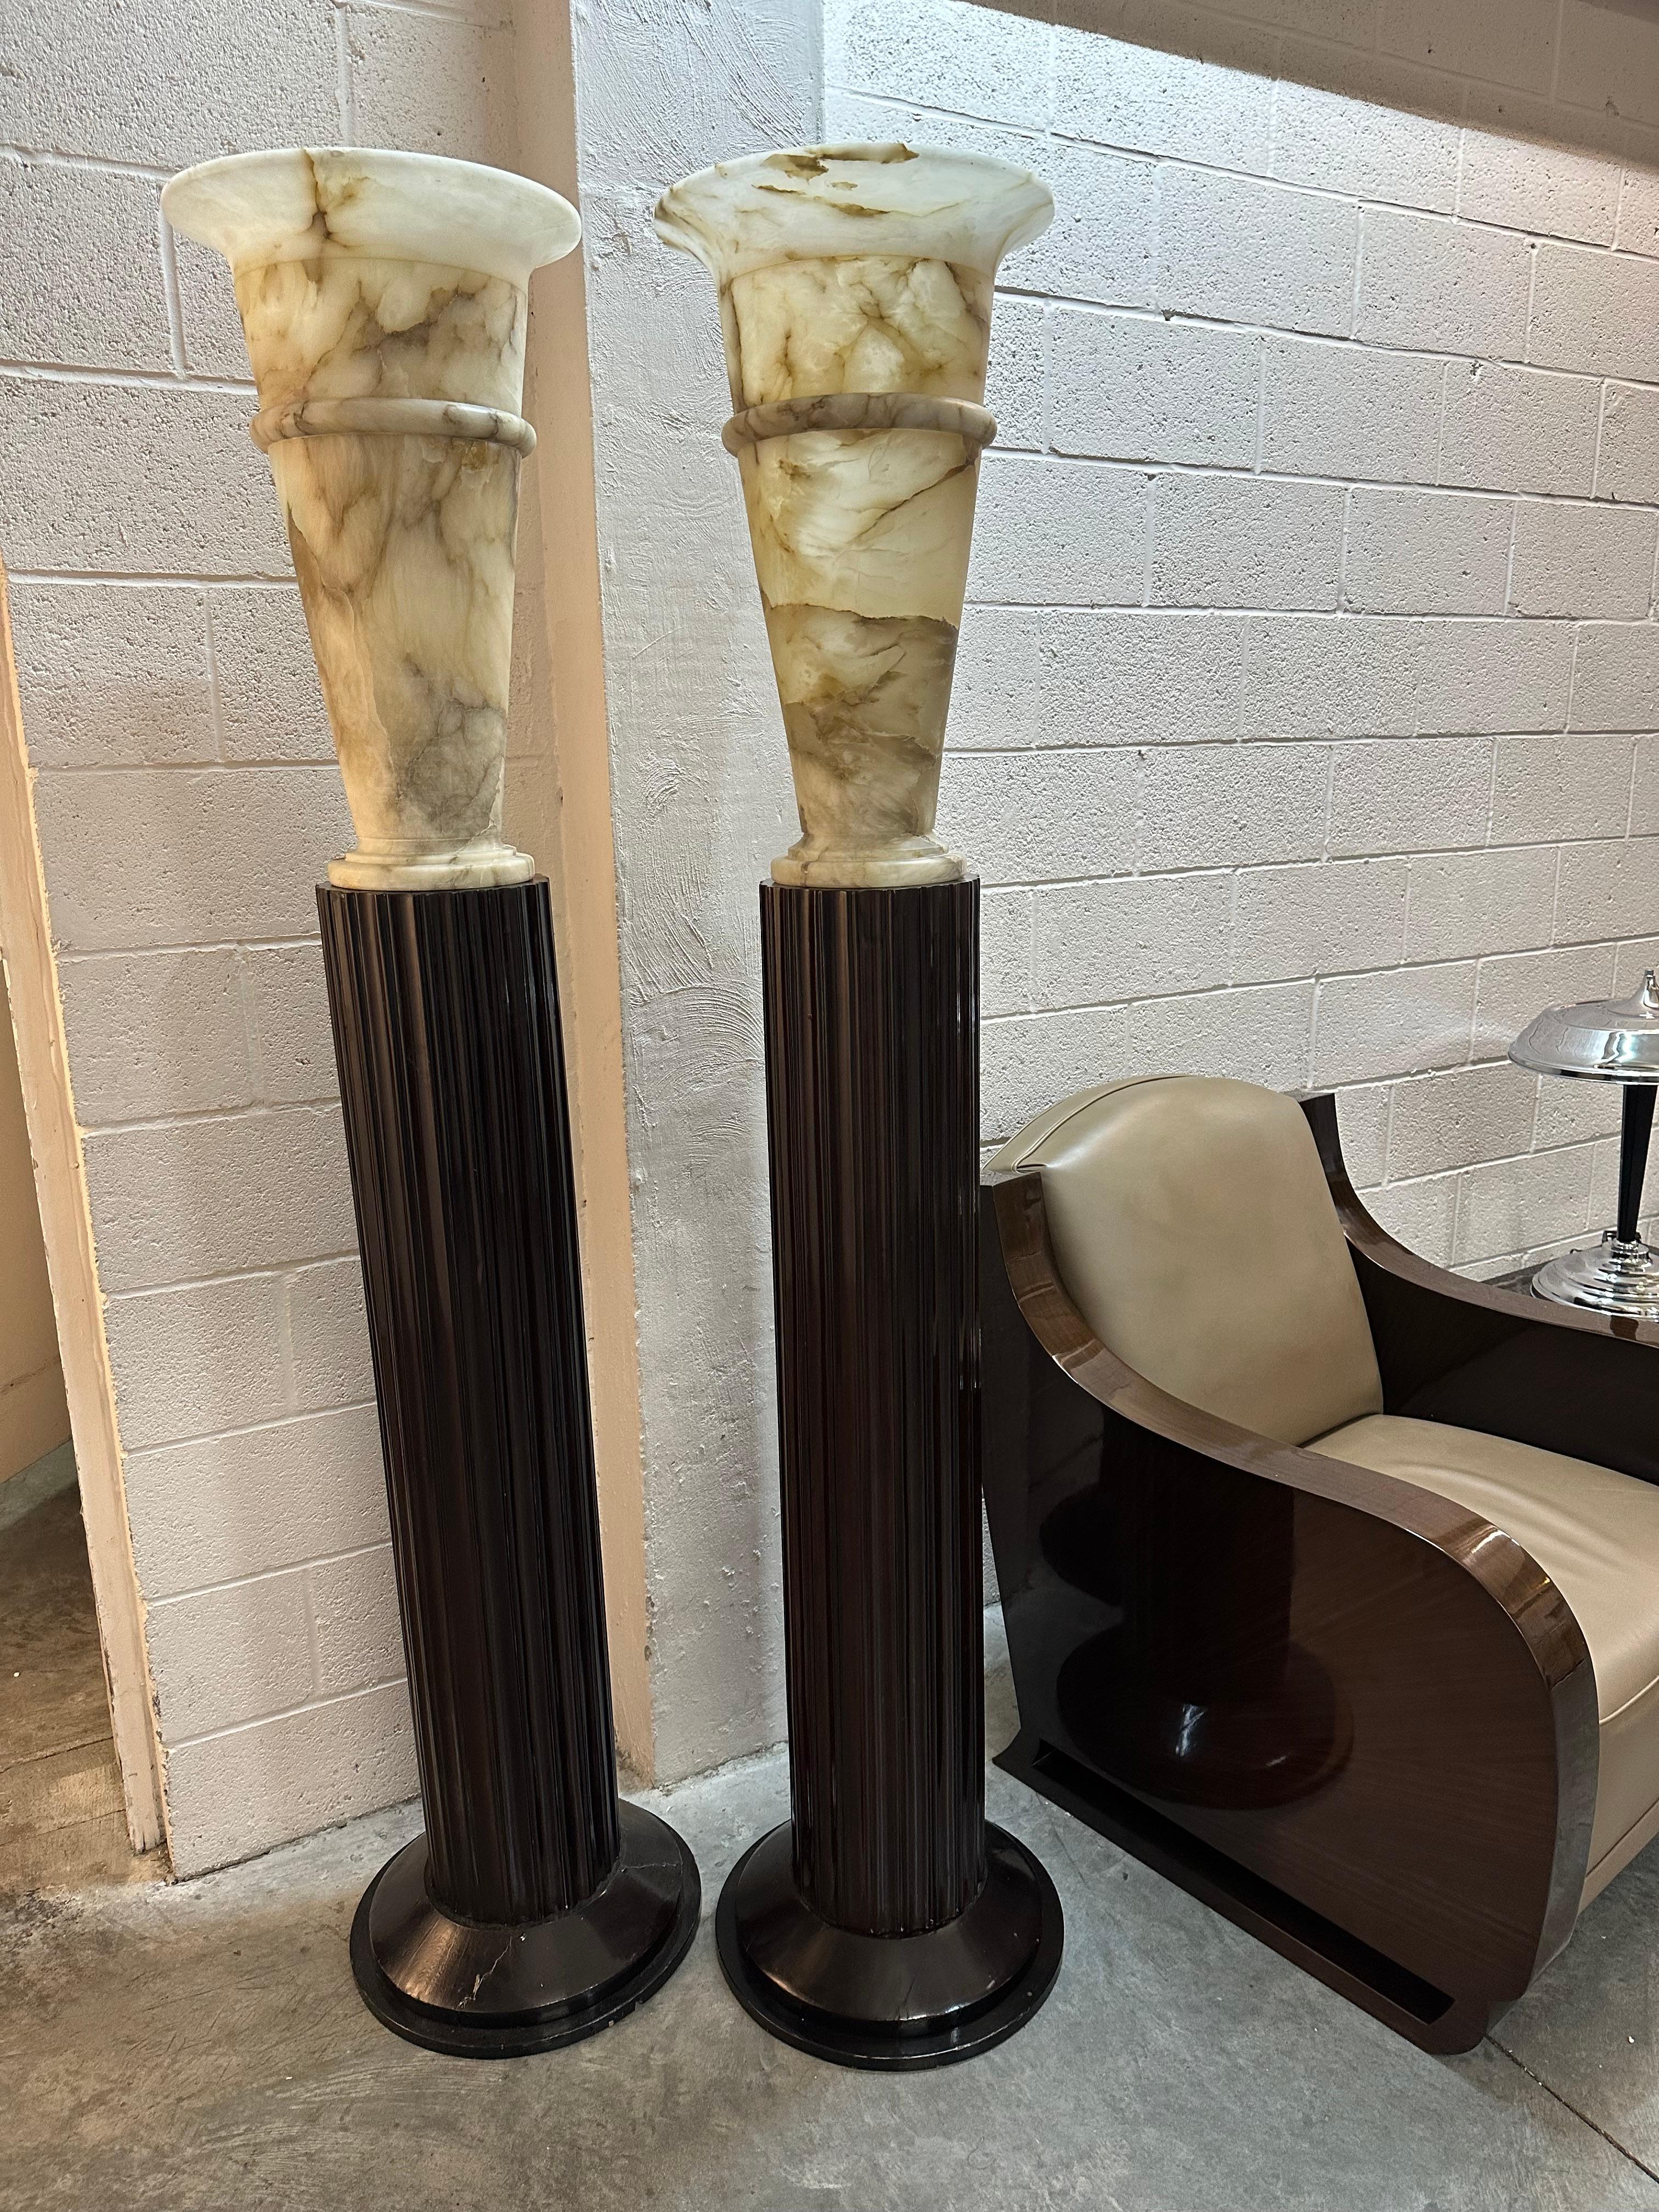 Pair of Art Deco Floor Lamps, France, Materials: Wood and Alabaster, 1930 For Sale 15